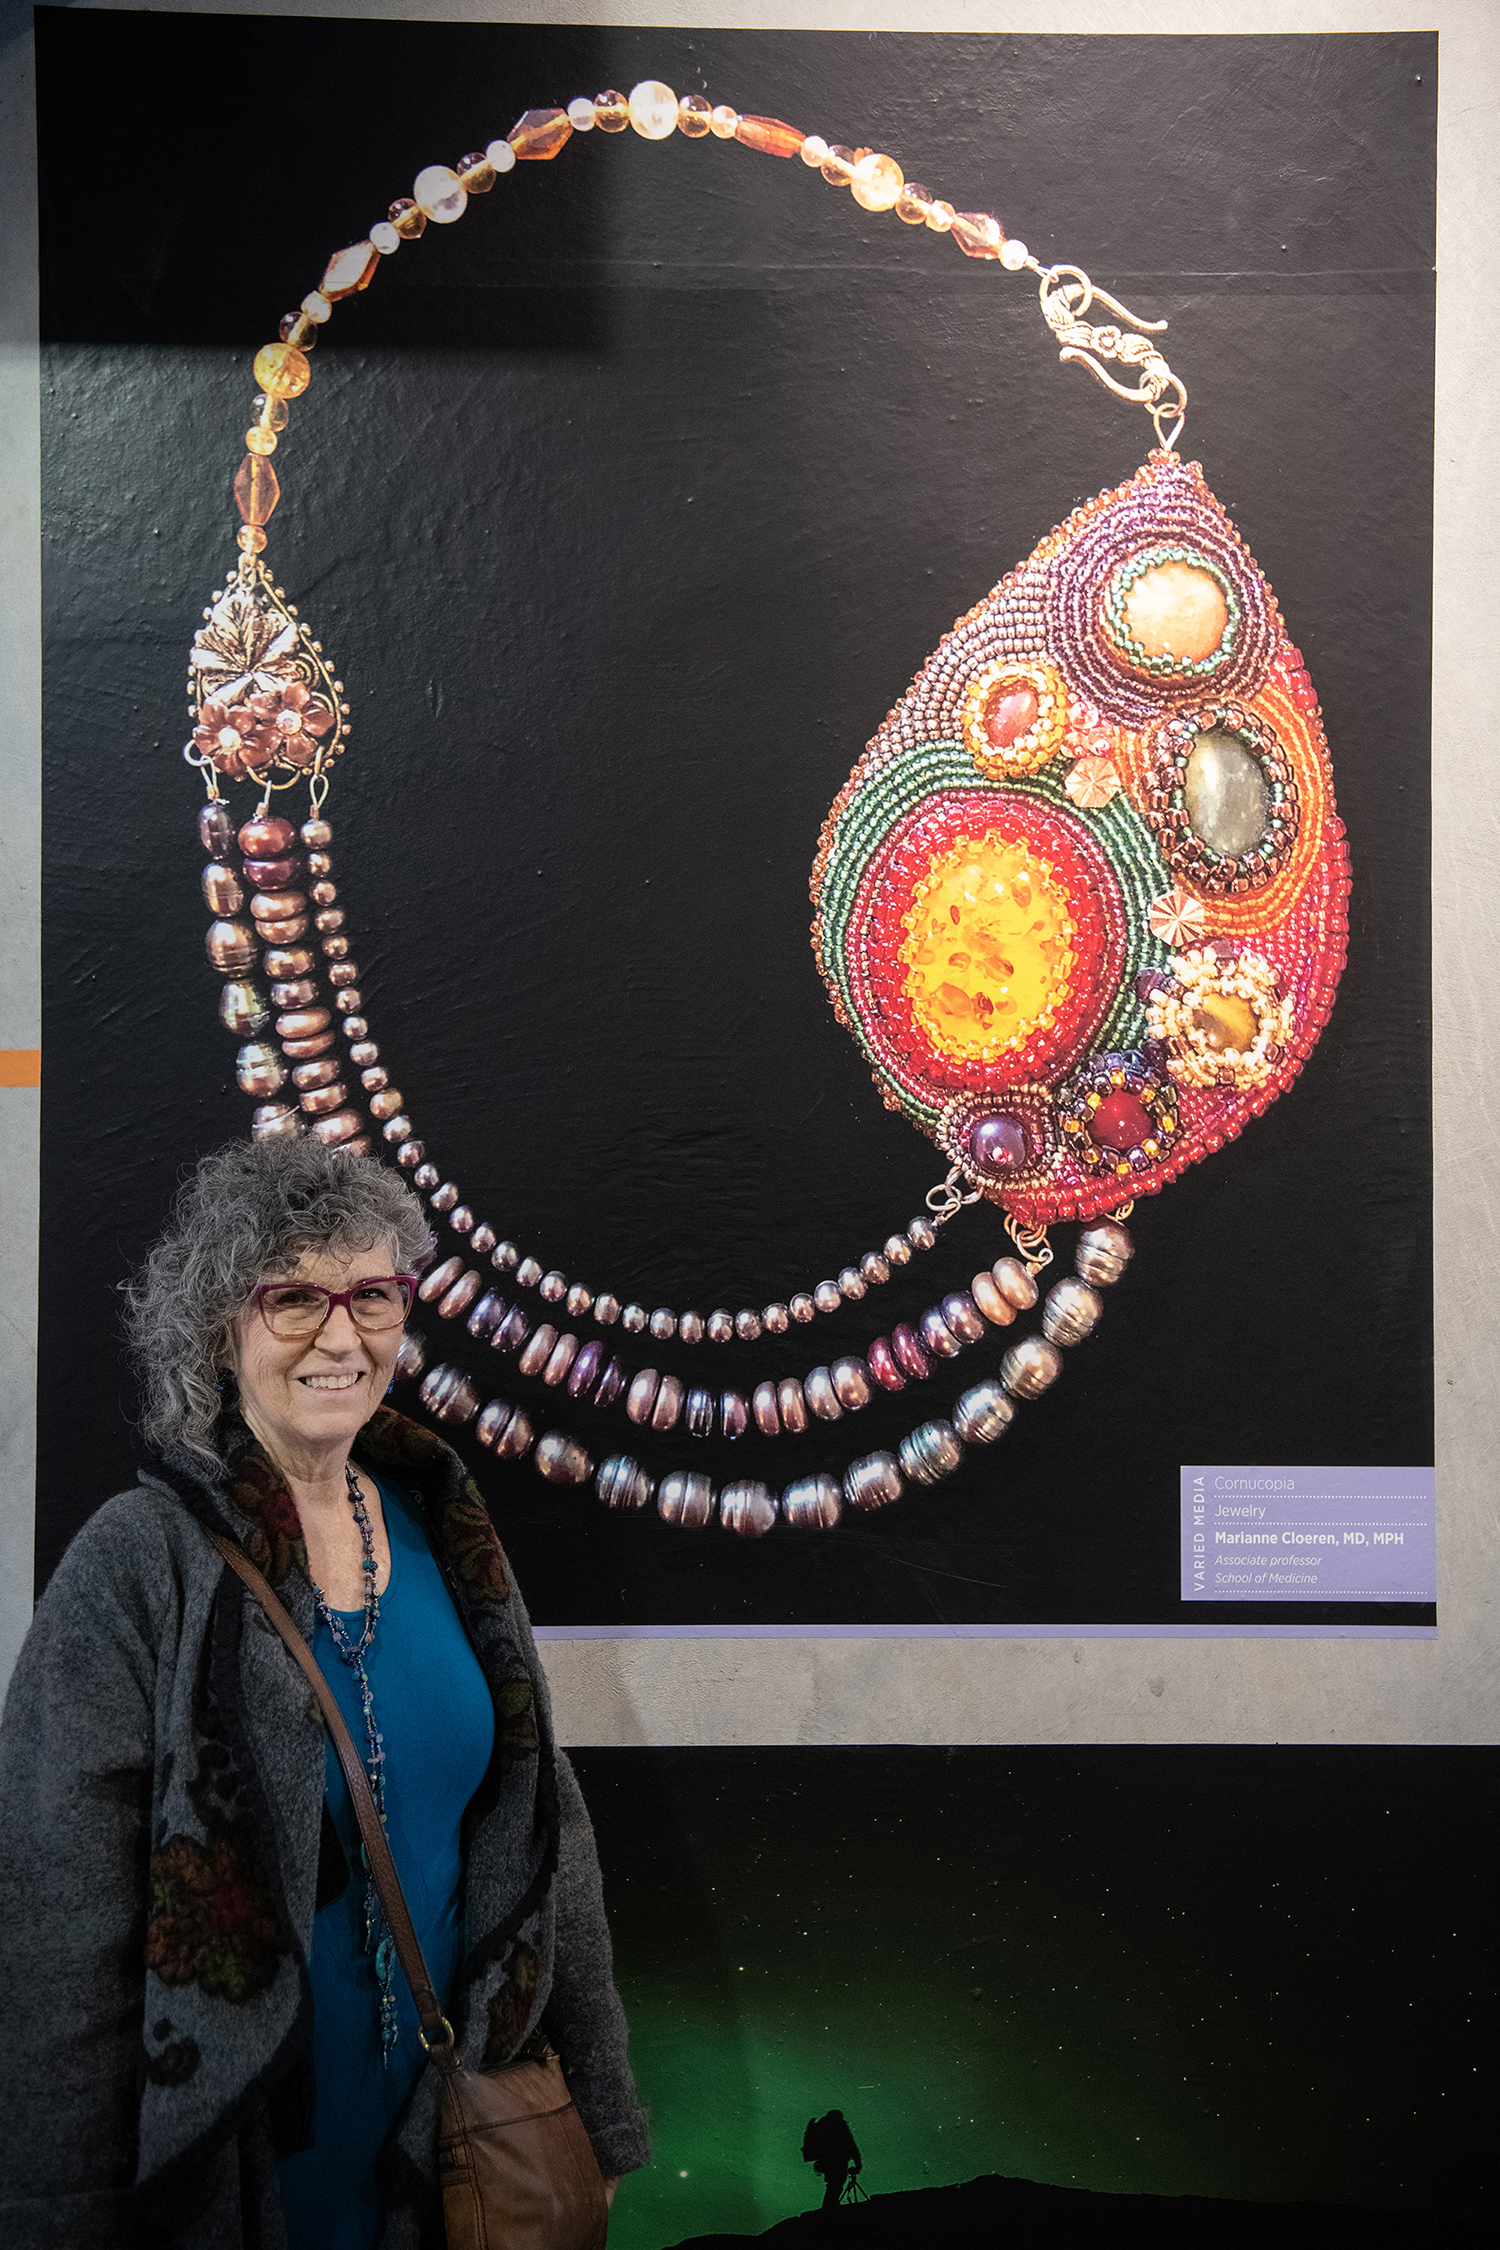 Marianne Cloeren stands in front of a photo of the asymmetric, handmade necklace she called “Cornucopia.”